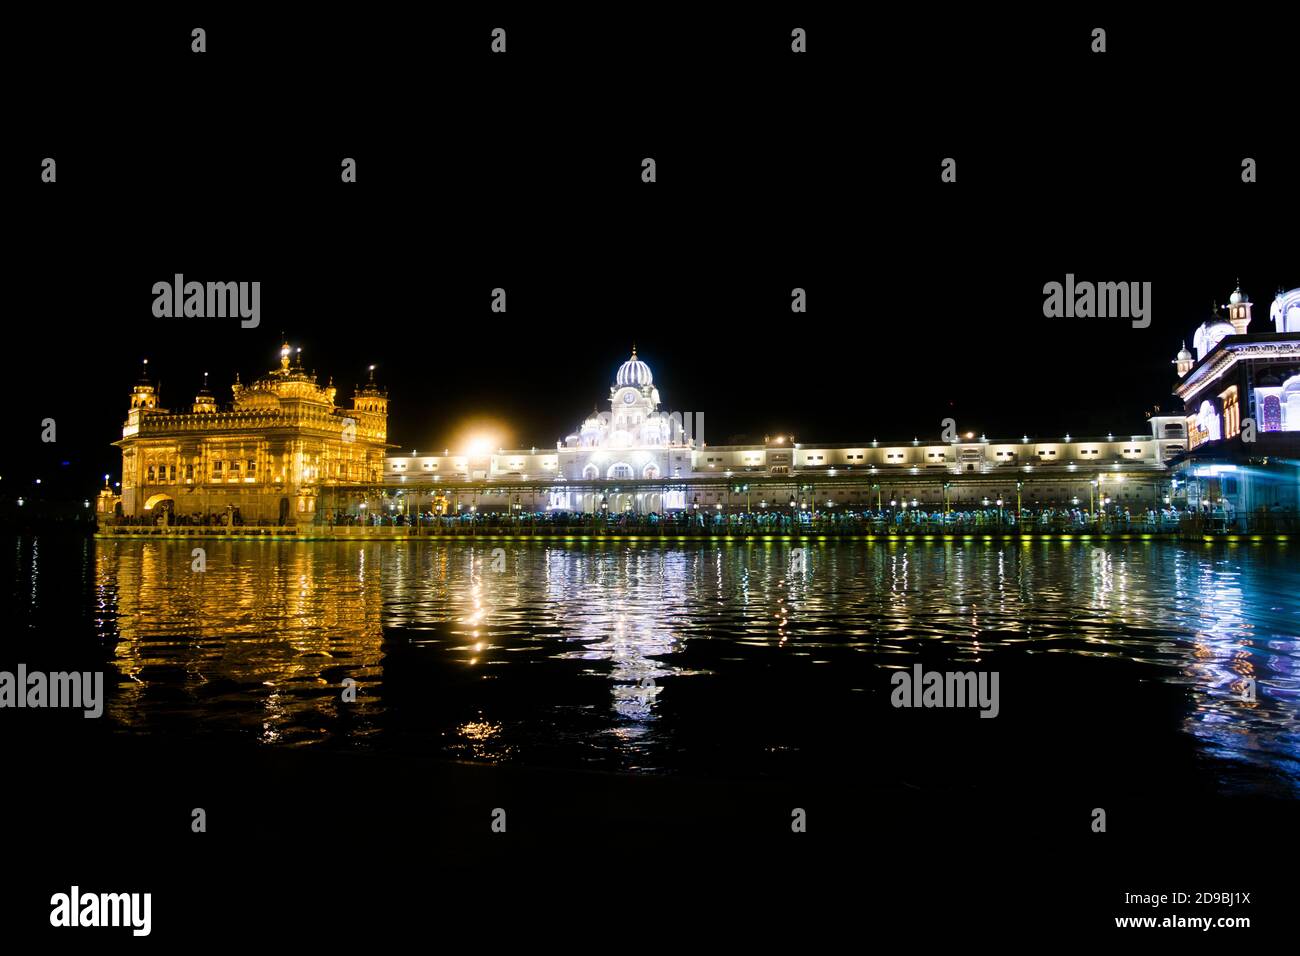 Night View The Harmindar Sahib, also known as Golden Temple Amritsar. Religious place of the Sikhs. Sikh gurdwara Stock Photo